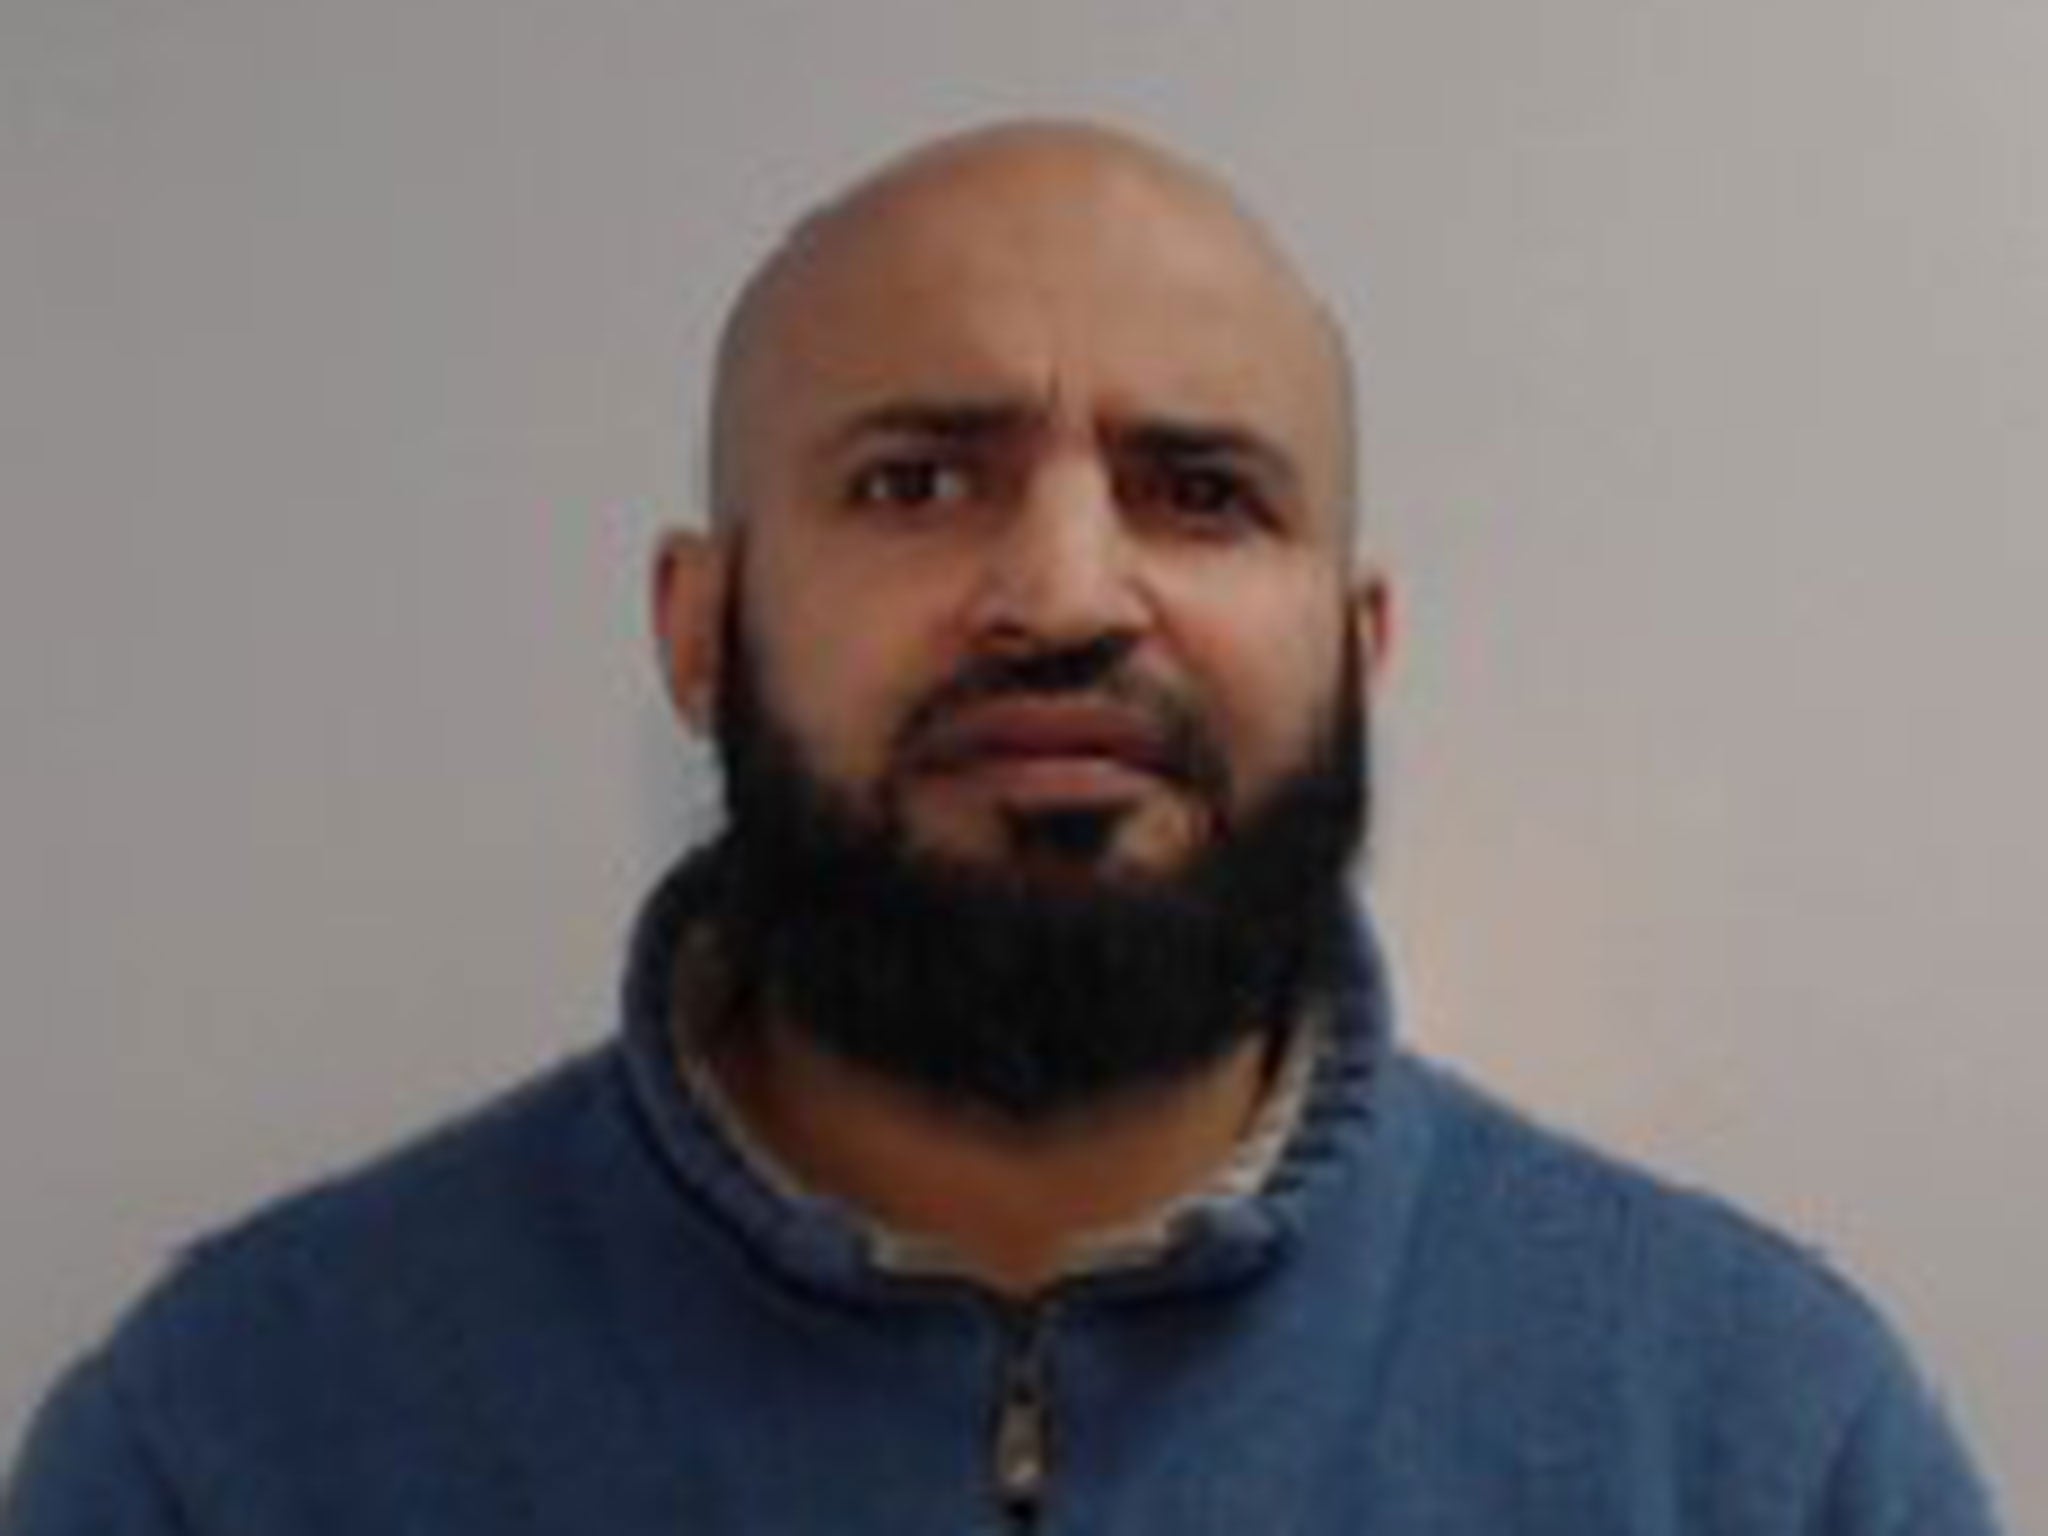 Saleem, who has three children, was convicted of two counts of sexual assault of a female under the age of 13